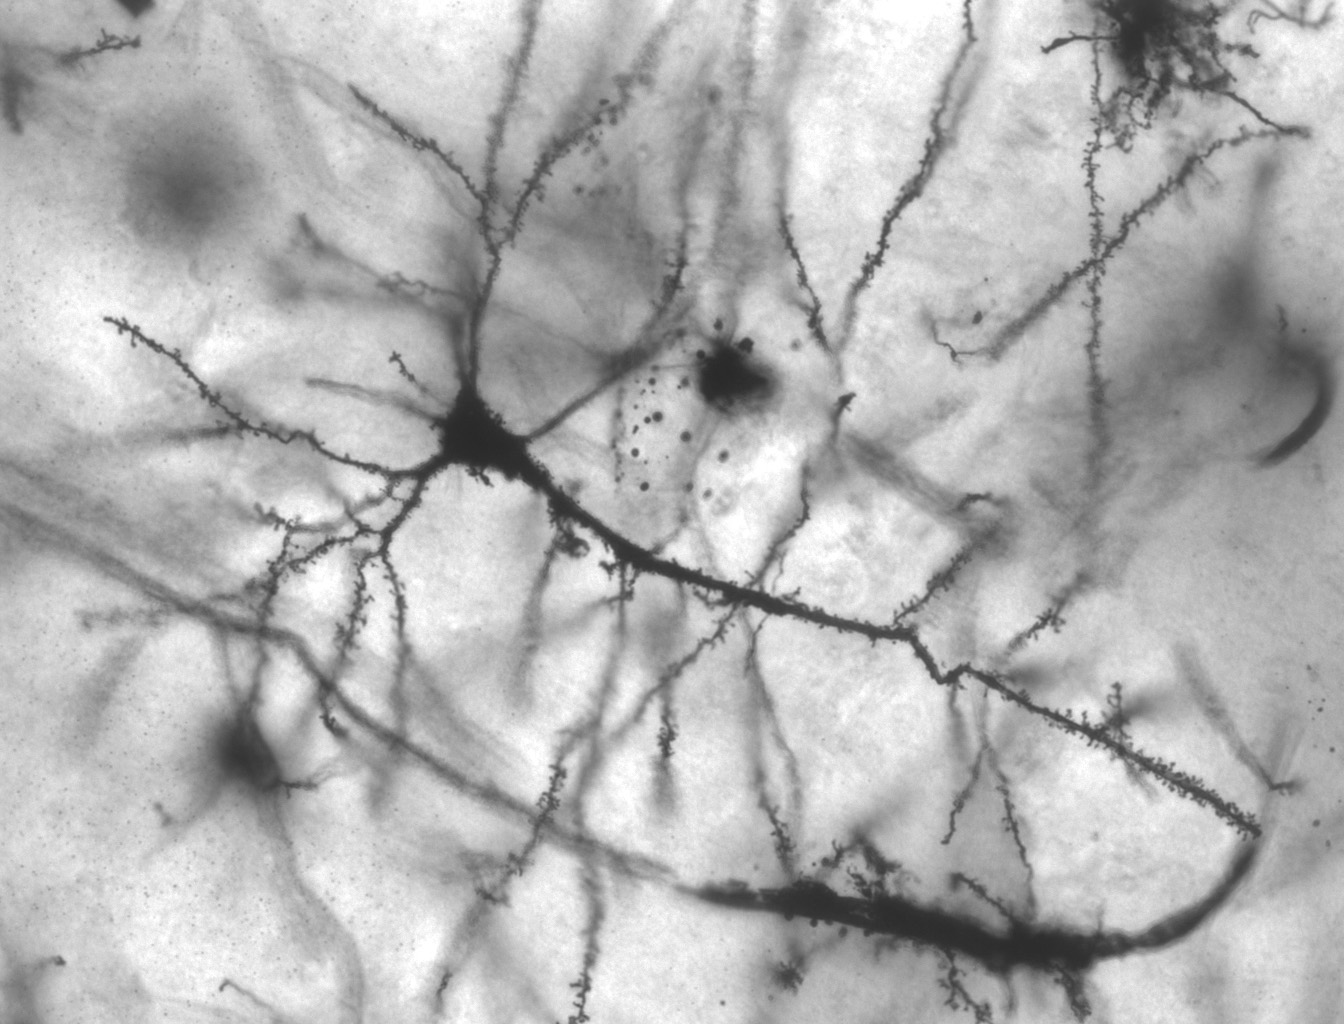 A photograph of a pyramidal neuron in the hippocampus